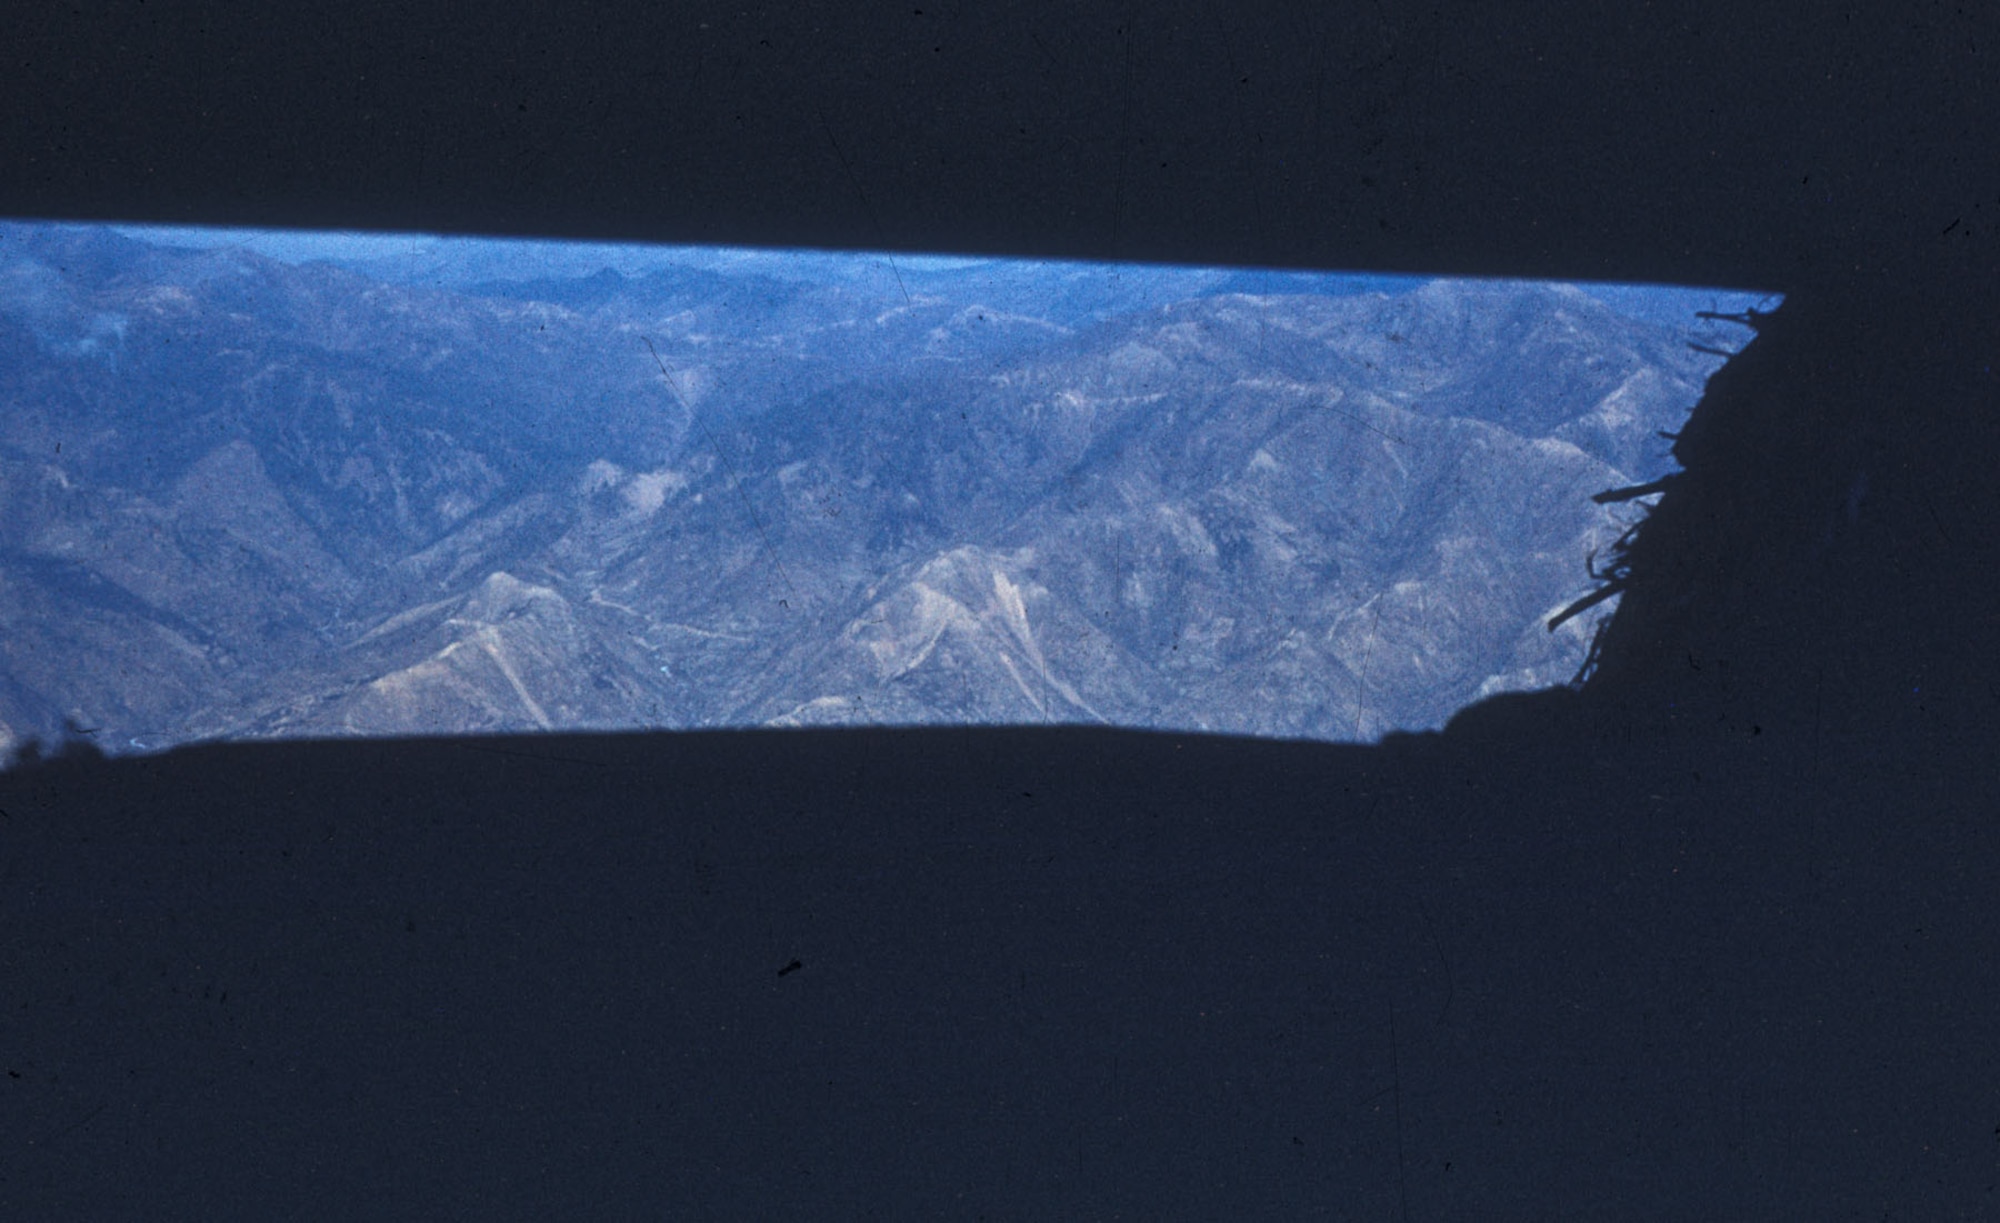 TACP personnel lived alongside ground troops at the front, sharing the same danger and hardships. This forbidding view of the MLR (Main Line of Resistance) was taken from within a bunker by Airman 2nd Class Jerry Allen. (U.S. Air Force photo)